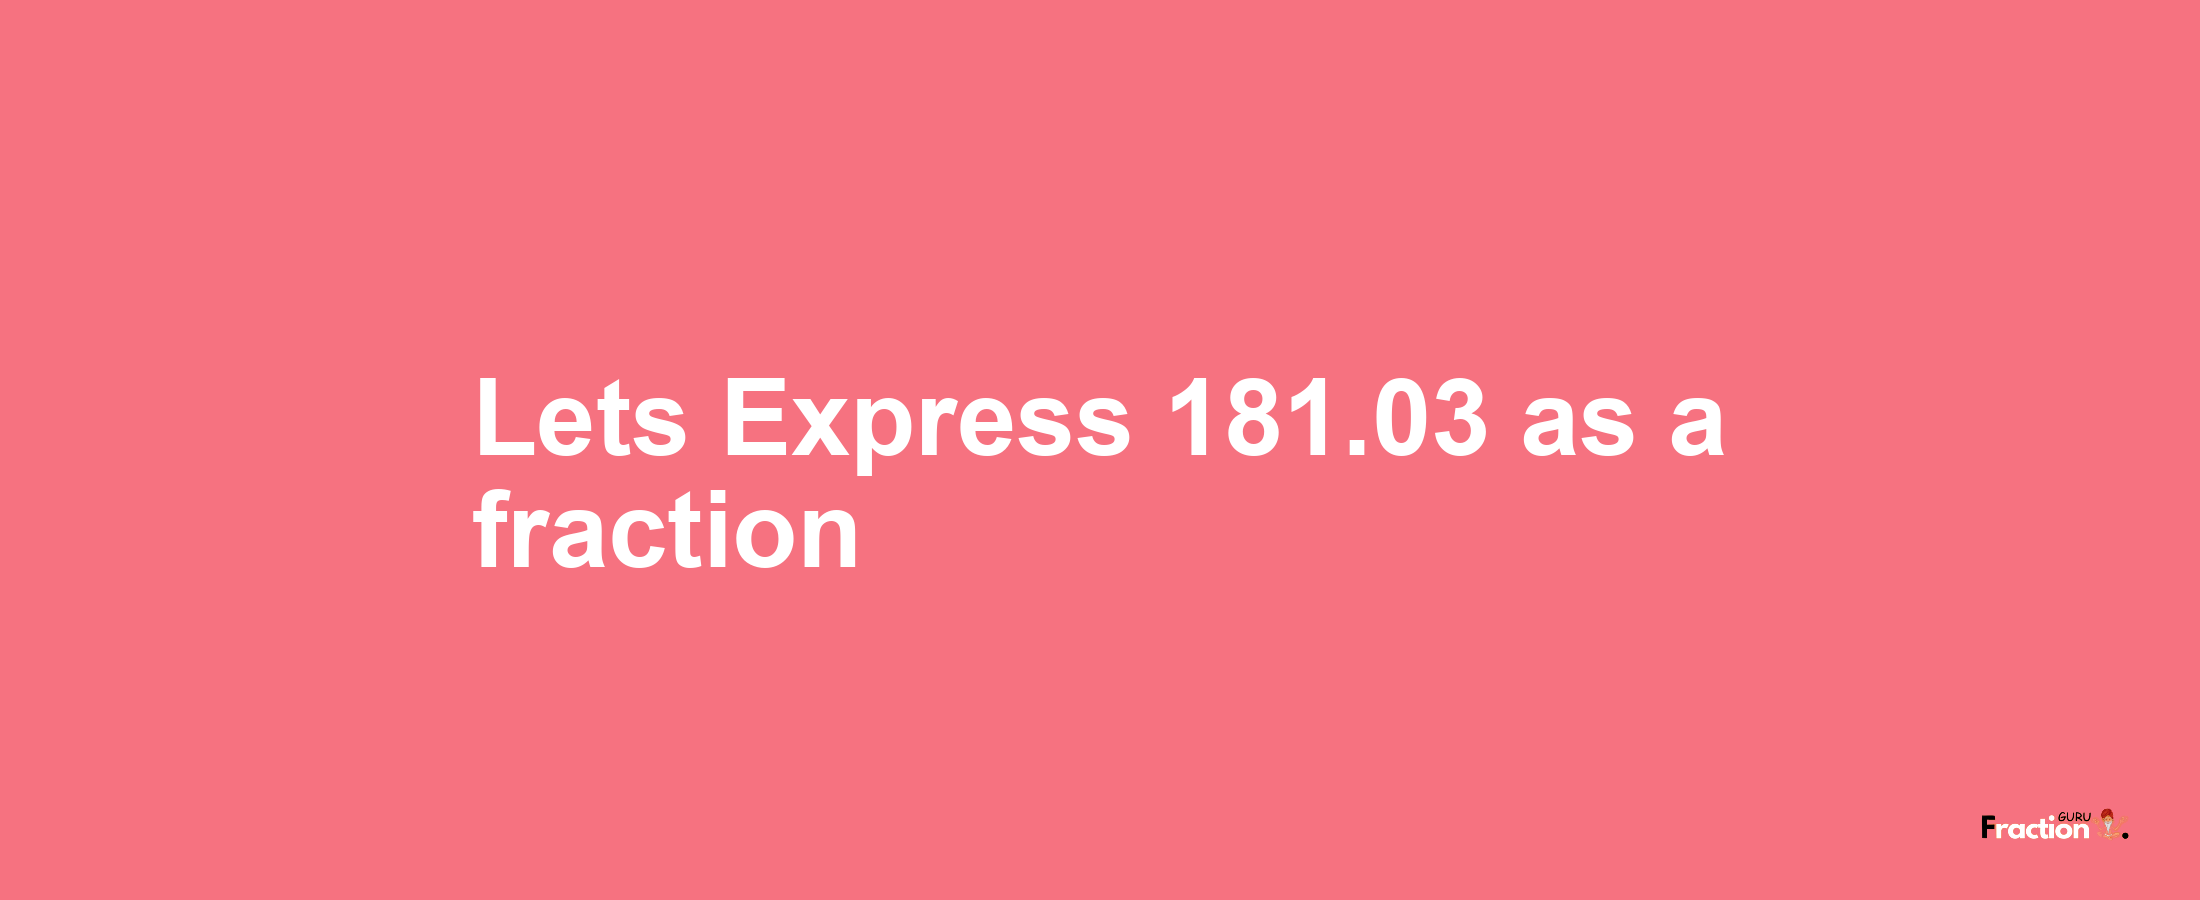 Lets Express 181.03 as afraction